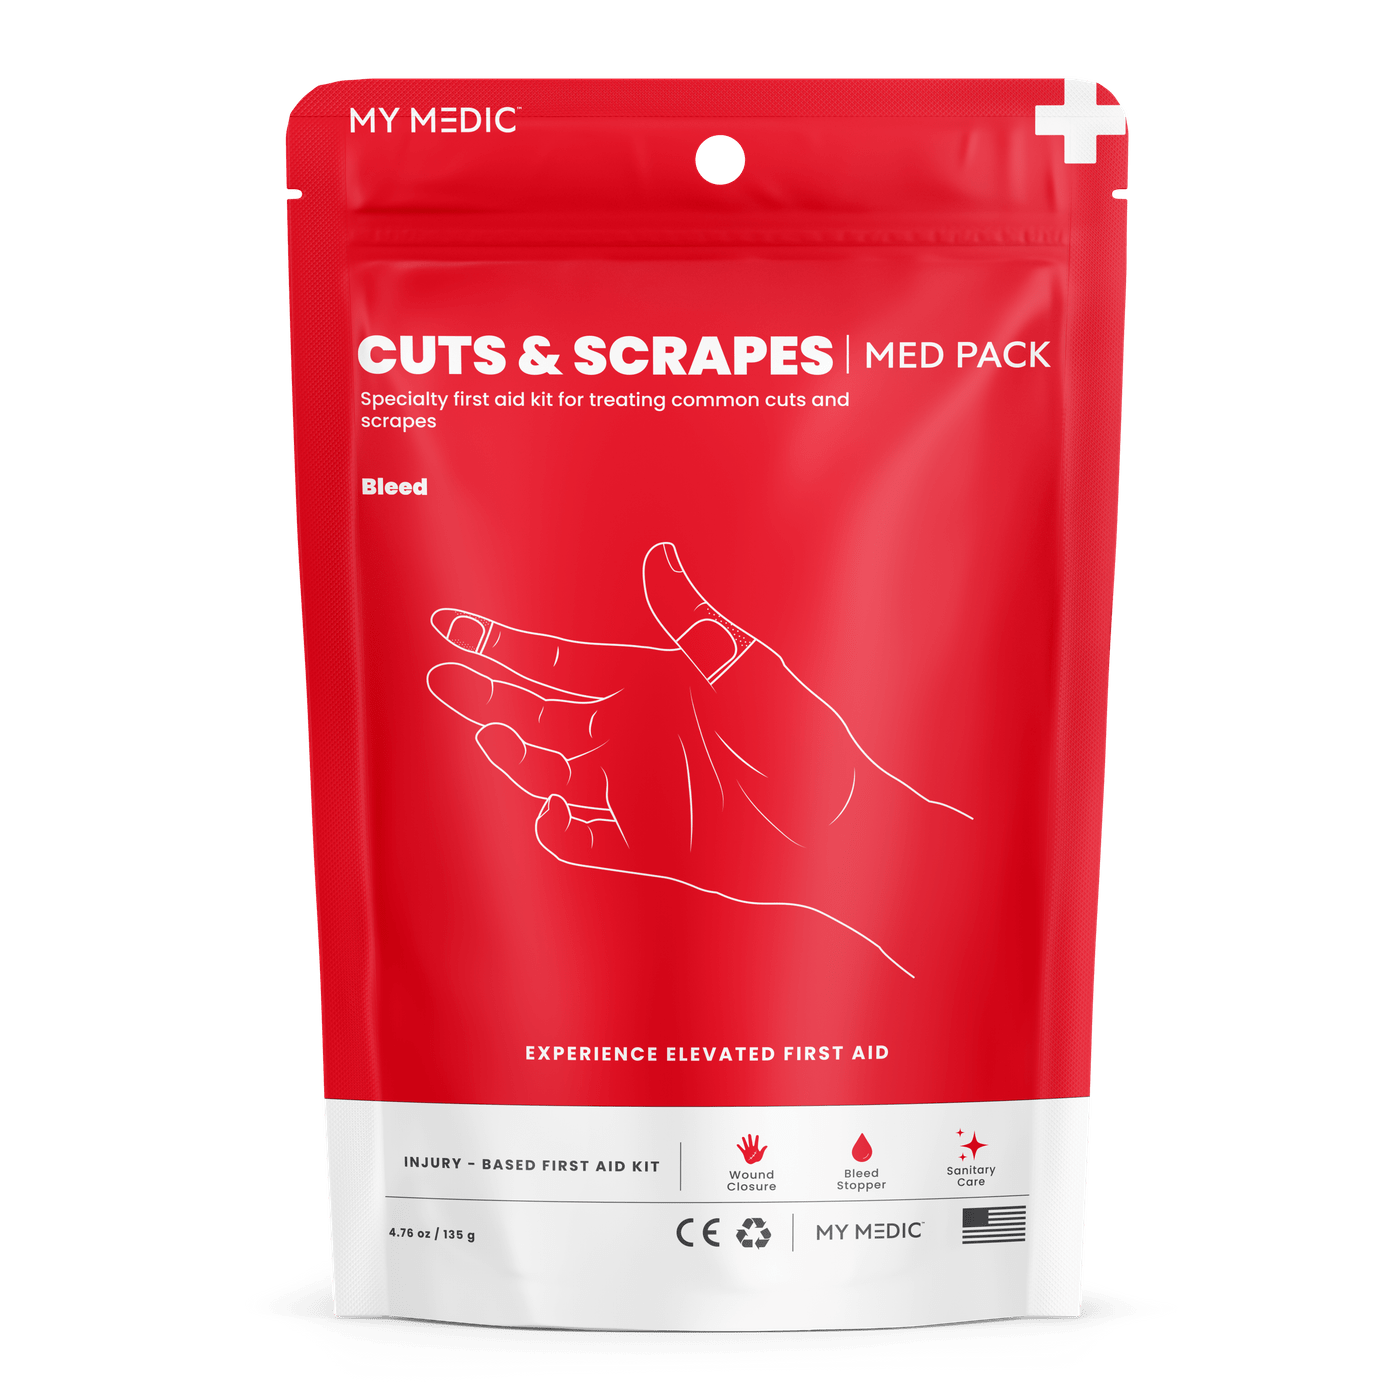 Cuts and Scrapes Med Pack